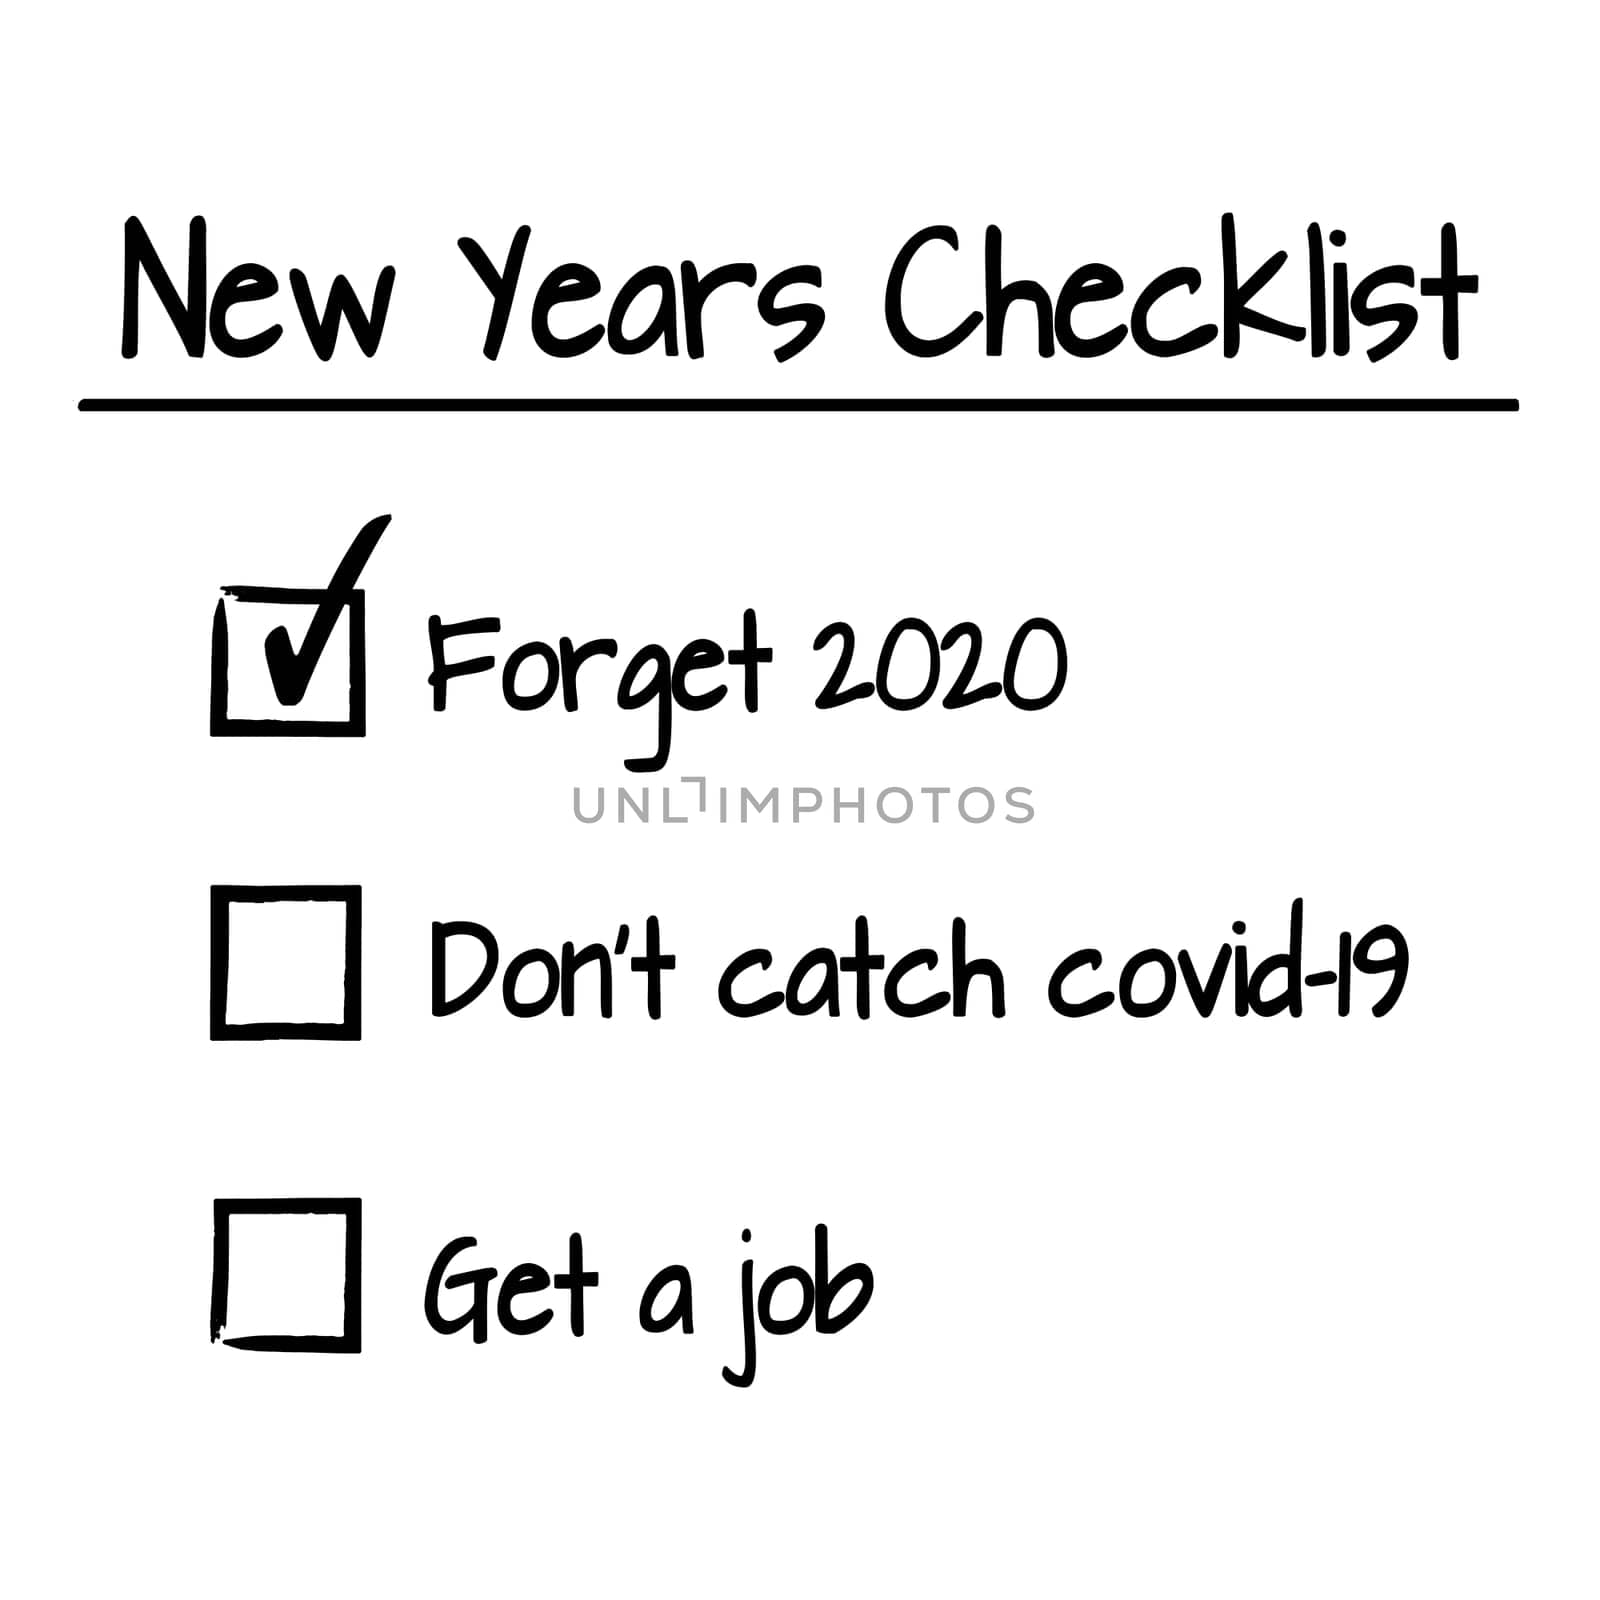 A funny new years checklist with boxes.